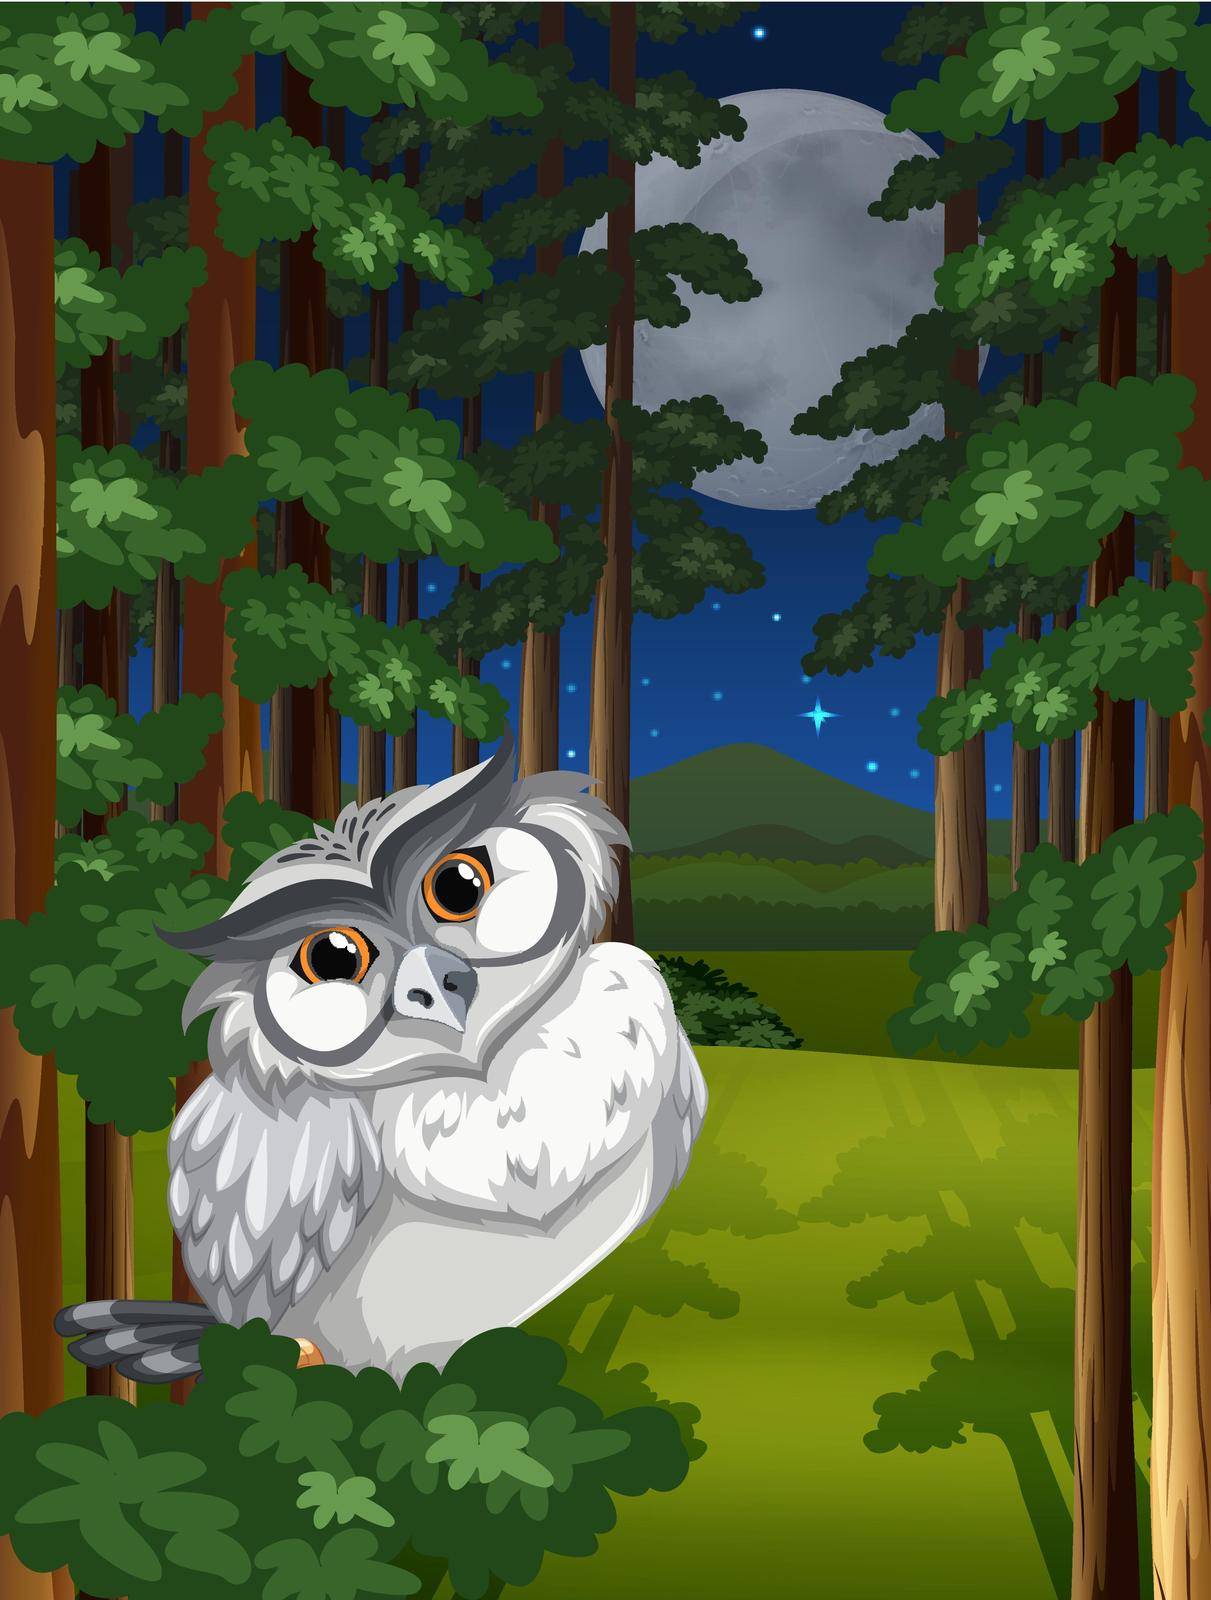 White owl sitting in the forest under full moon and stars